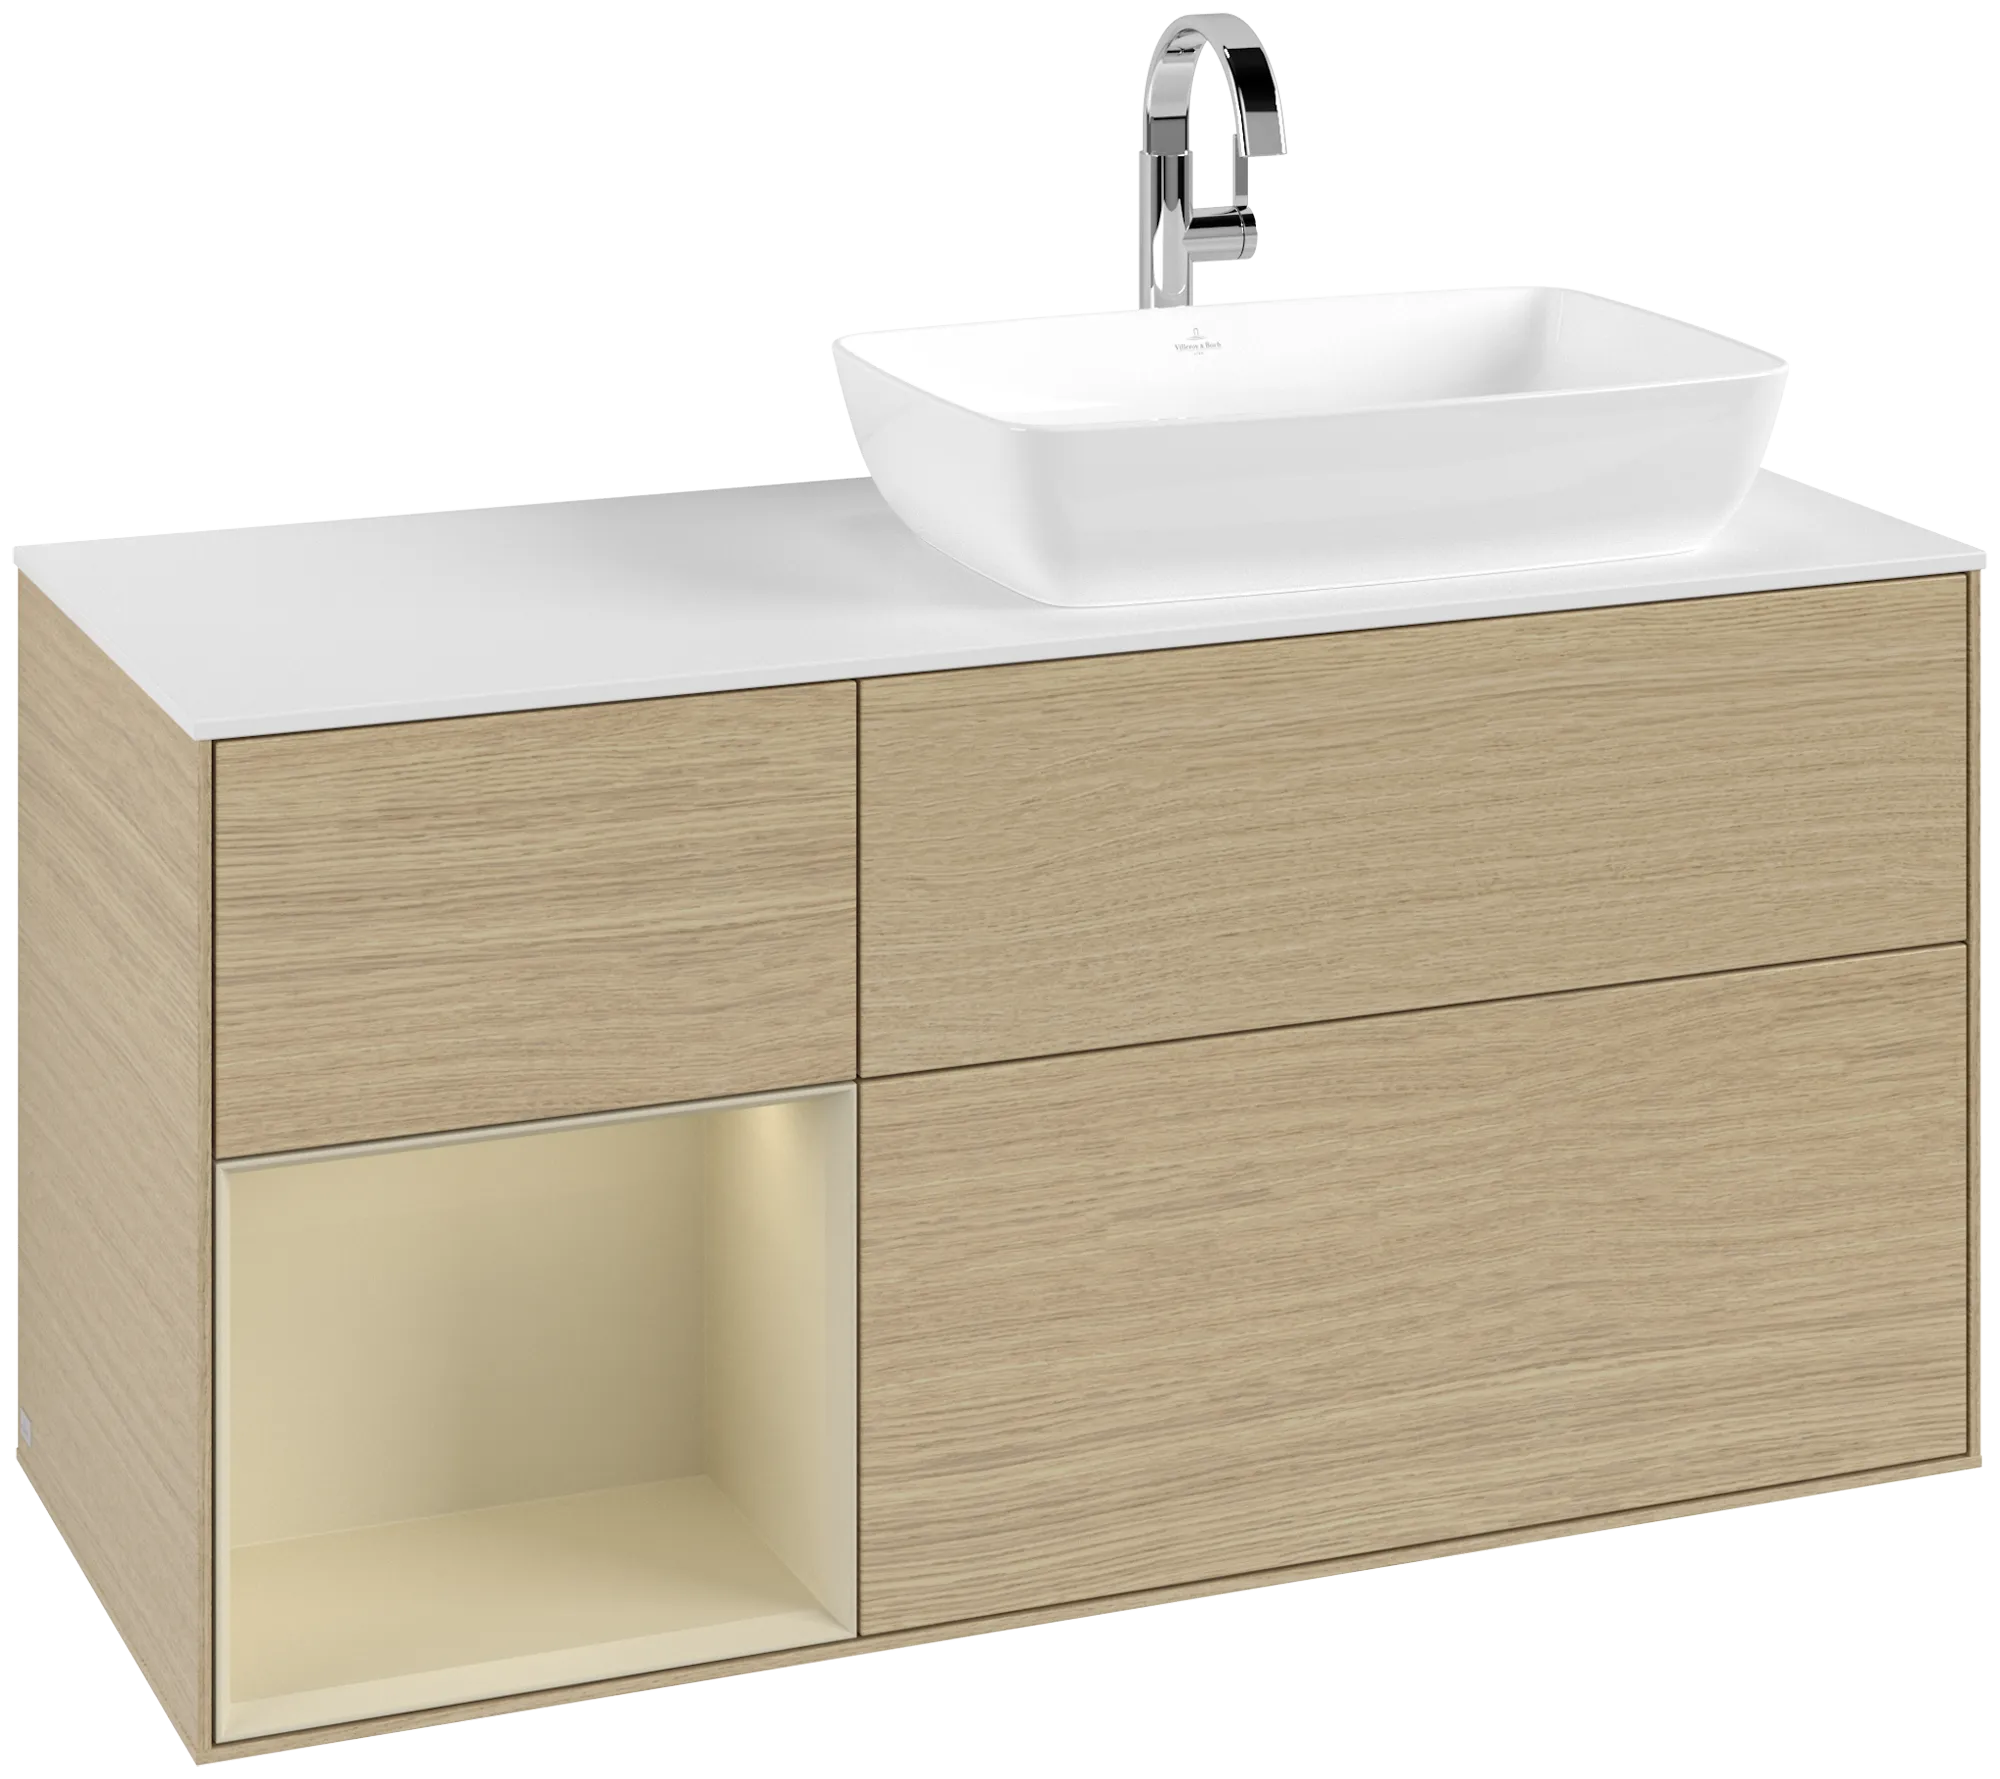 Picture of VILLEROY BOCH Finion Vanity unit, with lighting, 3 pull-out compartments, 1200 x 603 x 501 mm, Oak Veneer / Silk Grey Matt Lacquer / Glass White Matt #G801HJPC